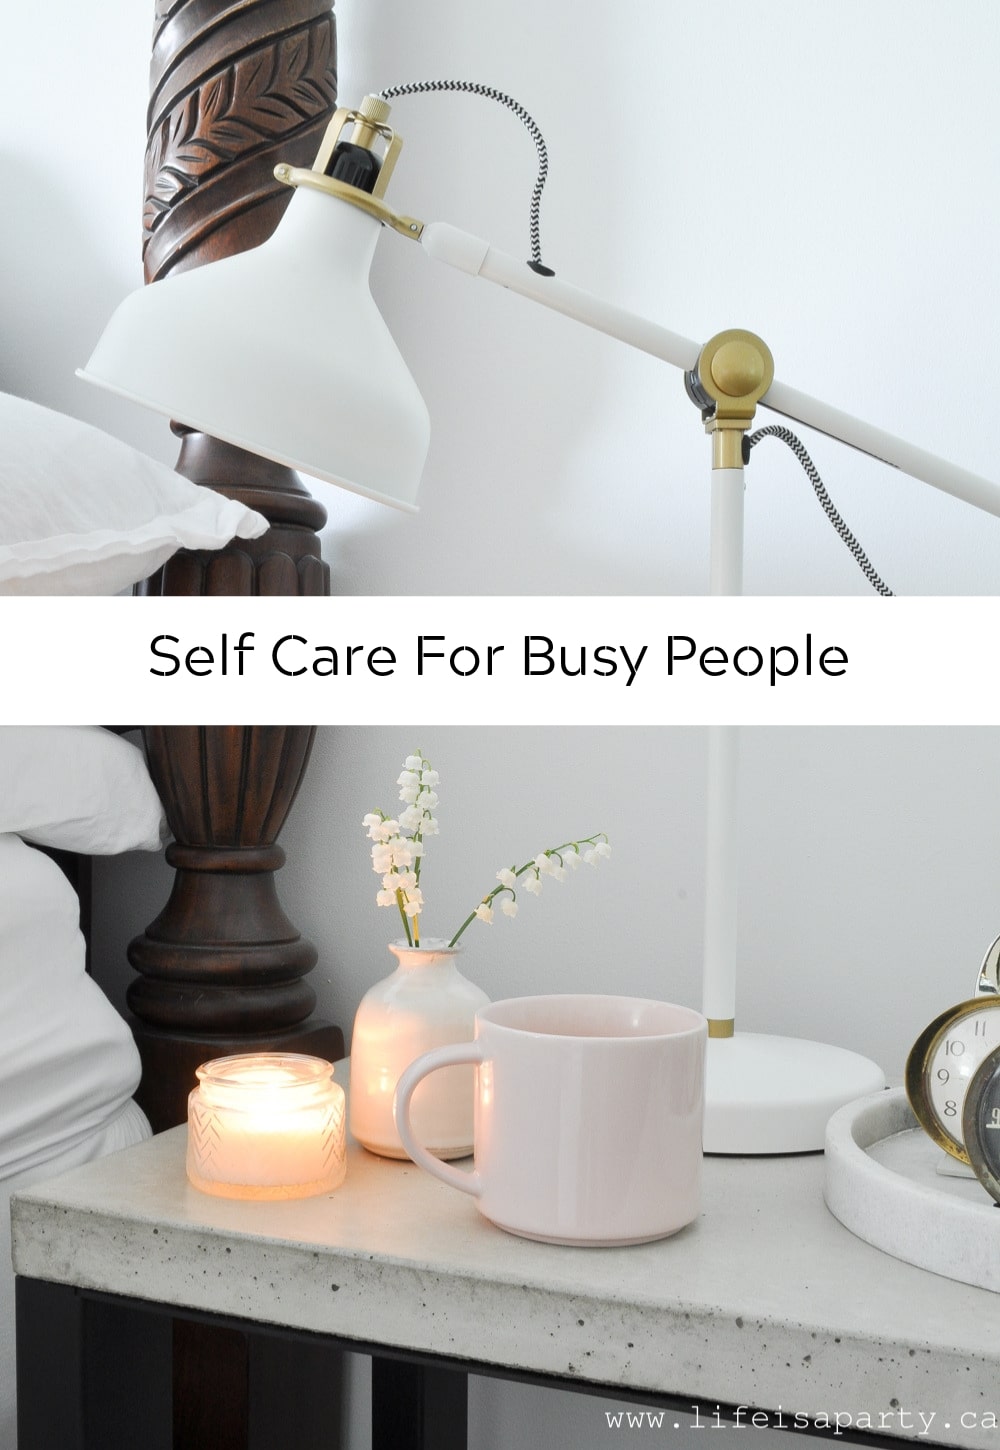 Self Care for Busy People